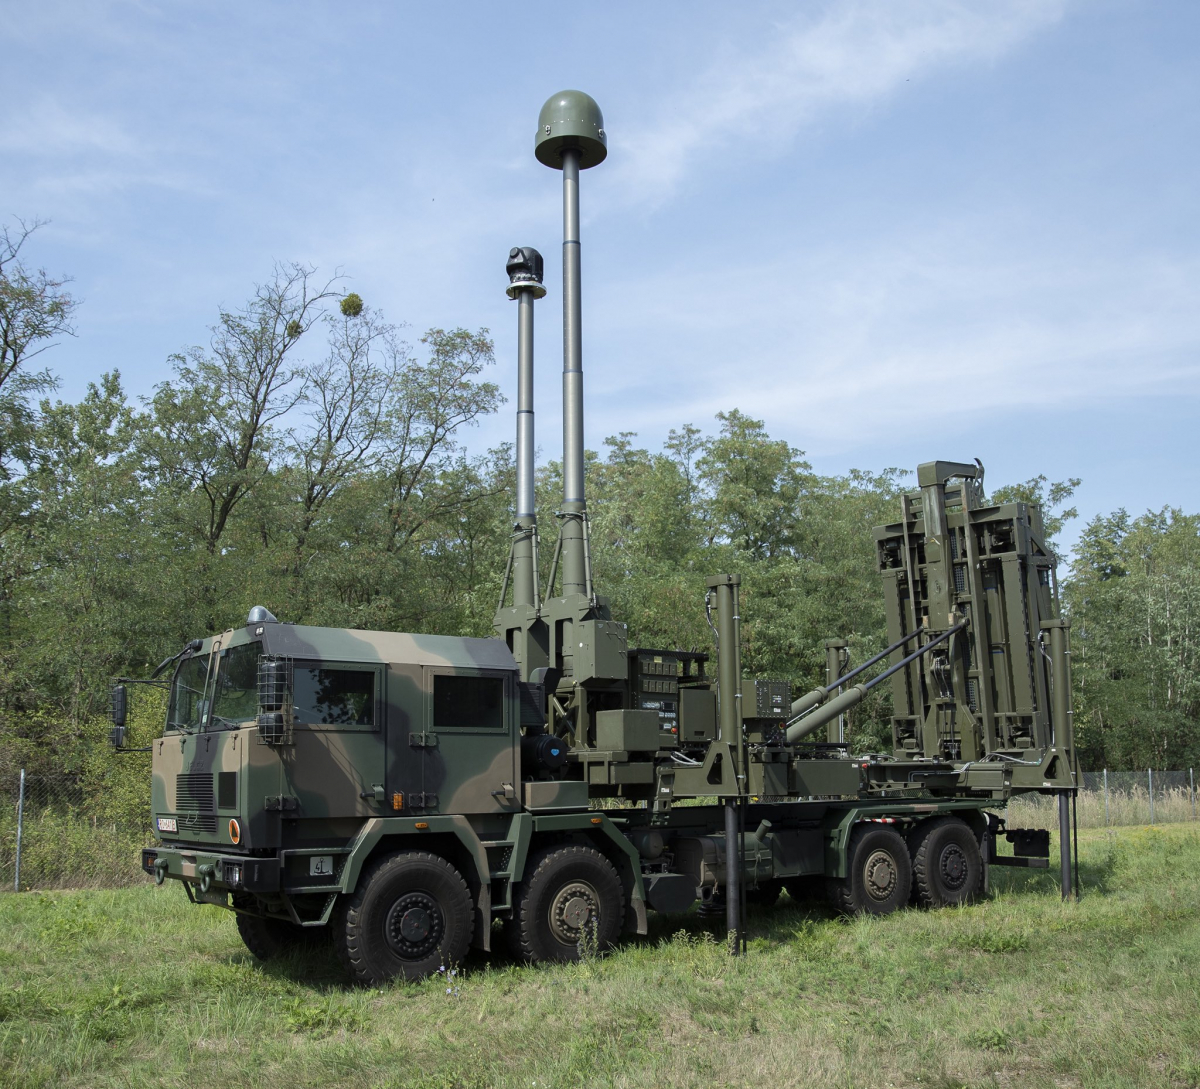 Poland speeds up delivery of its future Narew anti-aircraft system